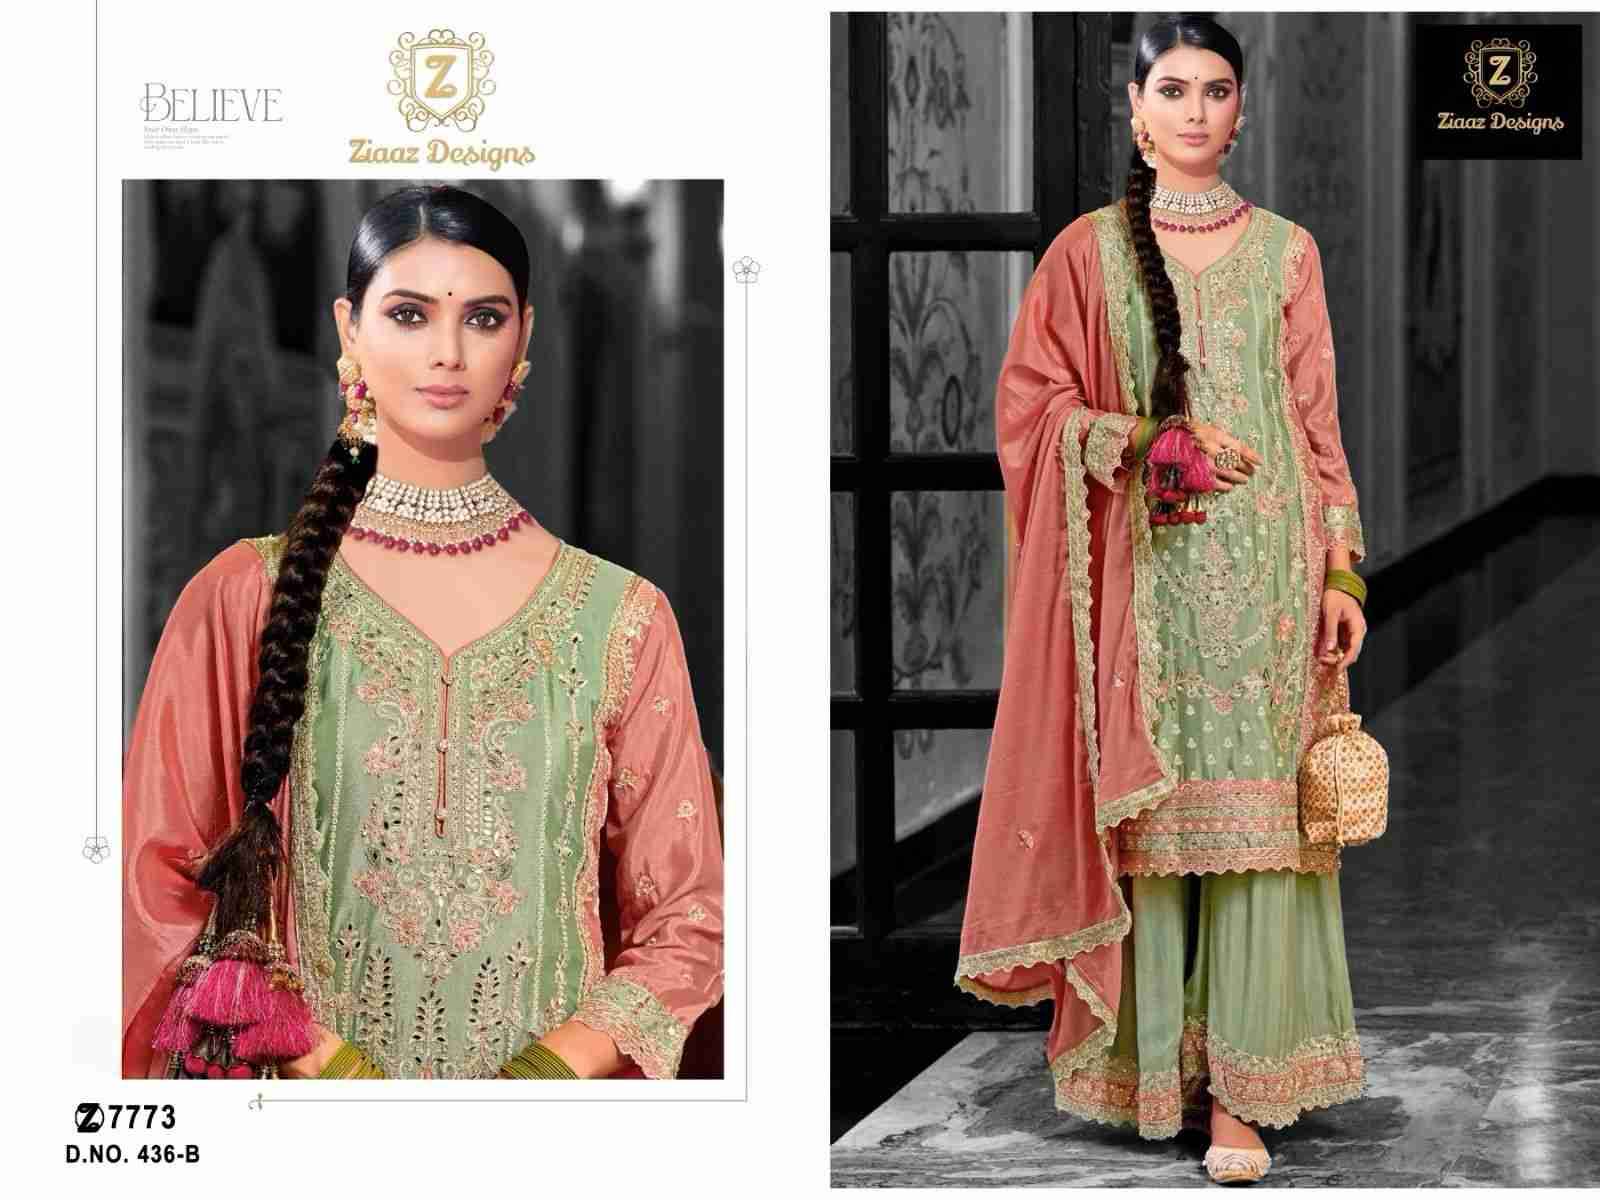 Ziaaz Designs Hit Design 436 Colours By Ziaaz Designs 436-A To 436-C Series Designer Pakistani Suits Collection Beautiful Stylish Fancy Colorful Party Wear & Occasional Wear Chinnon Embroidered Dresses At Wholesale Price